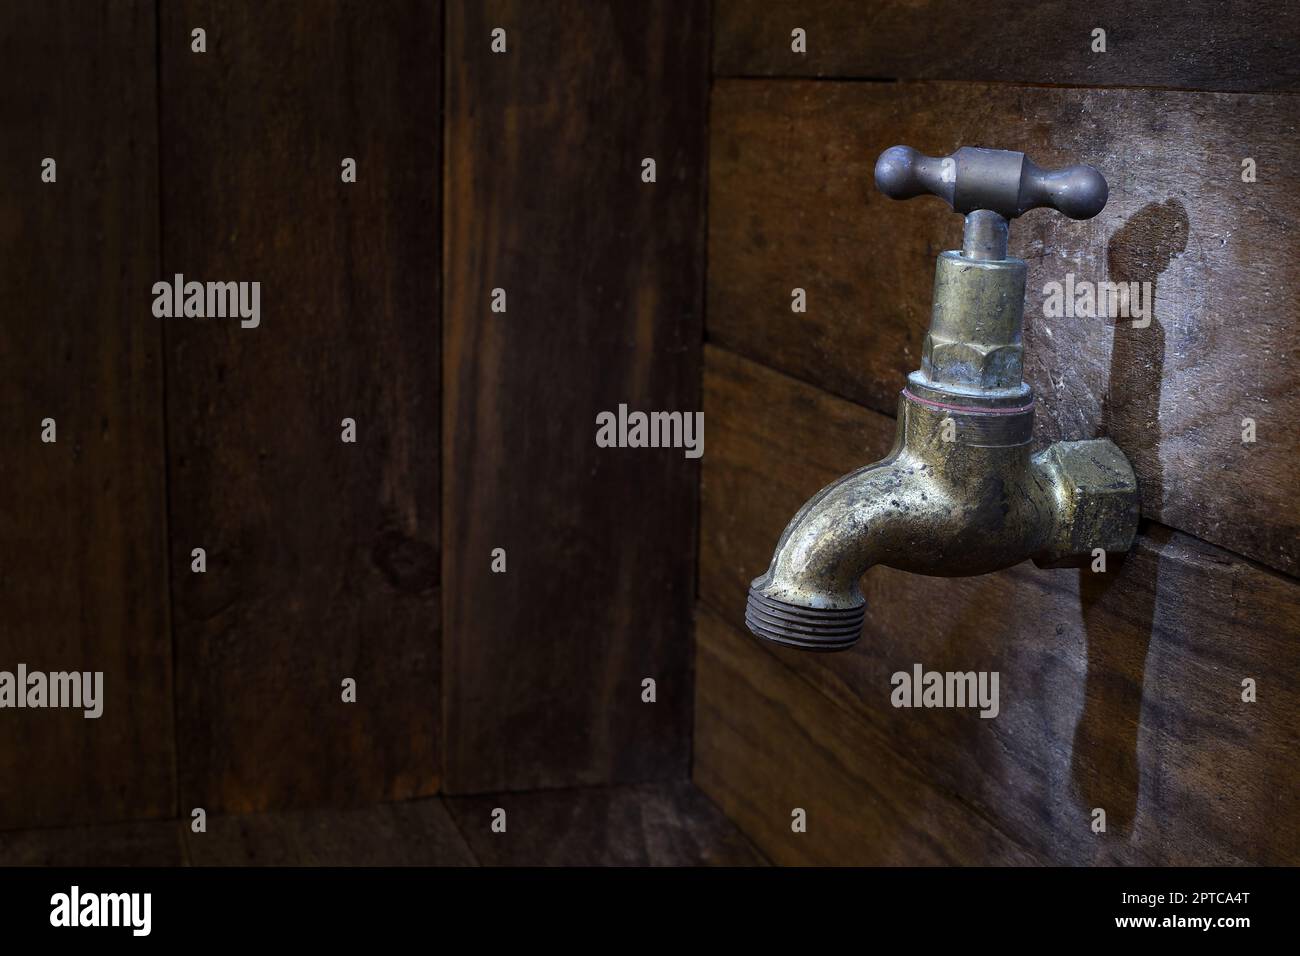 An old brass tap/faucet on a rustic wooden wall in soft dark mood lighting with copy space to the left of frame Stock Photo